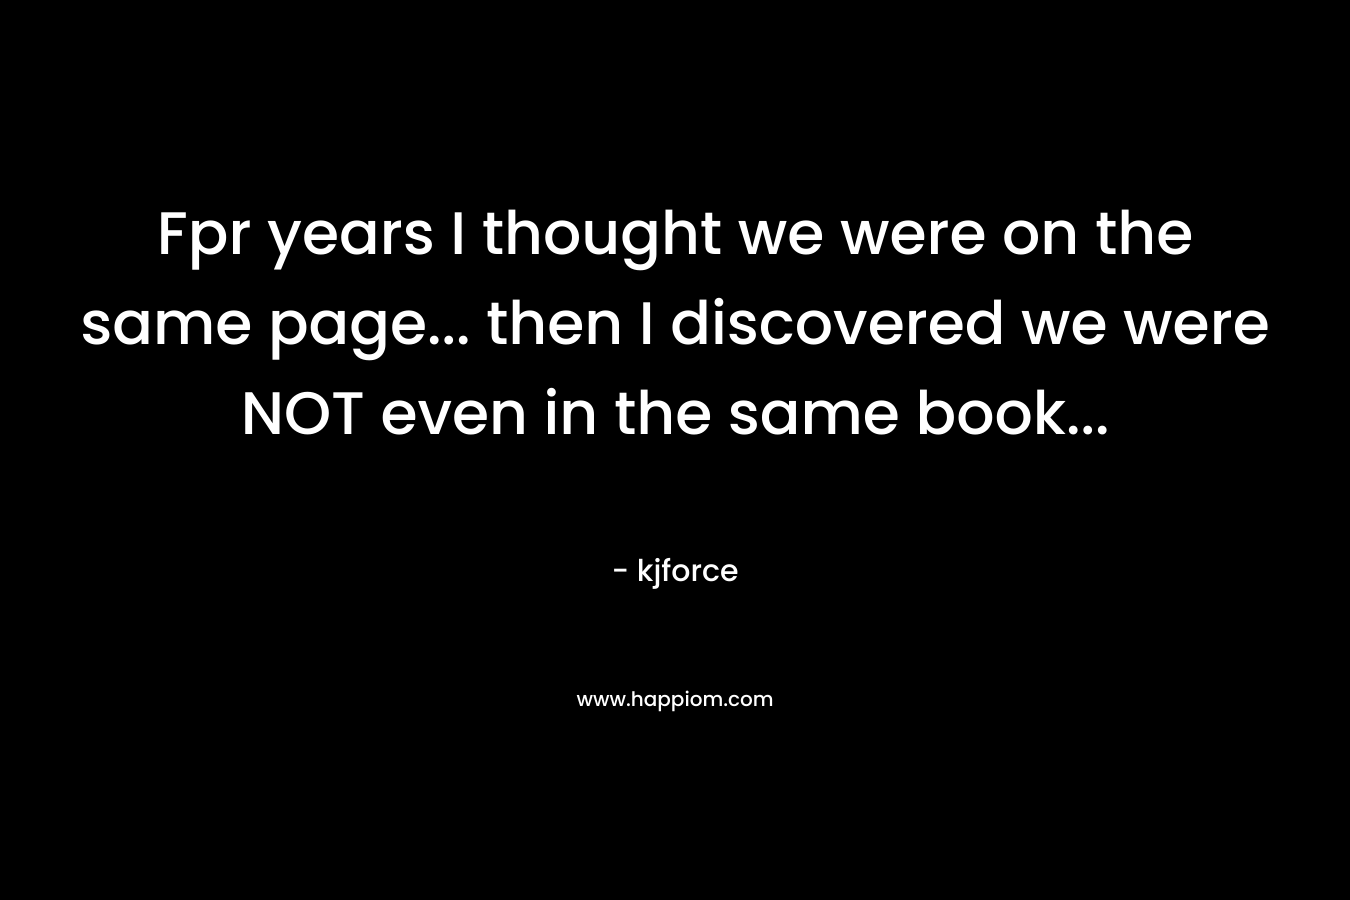 Fpr years I thought we were on the same page… then I discovered we were NOT even in the same book… – kjforce